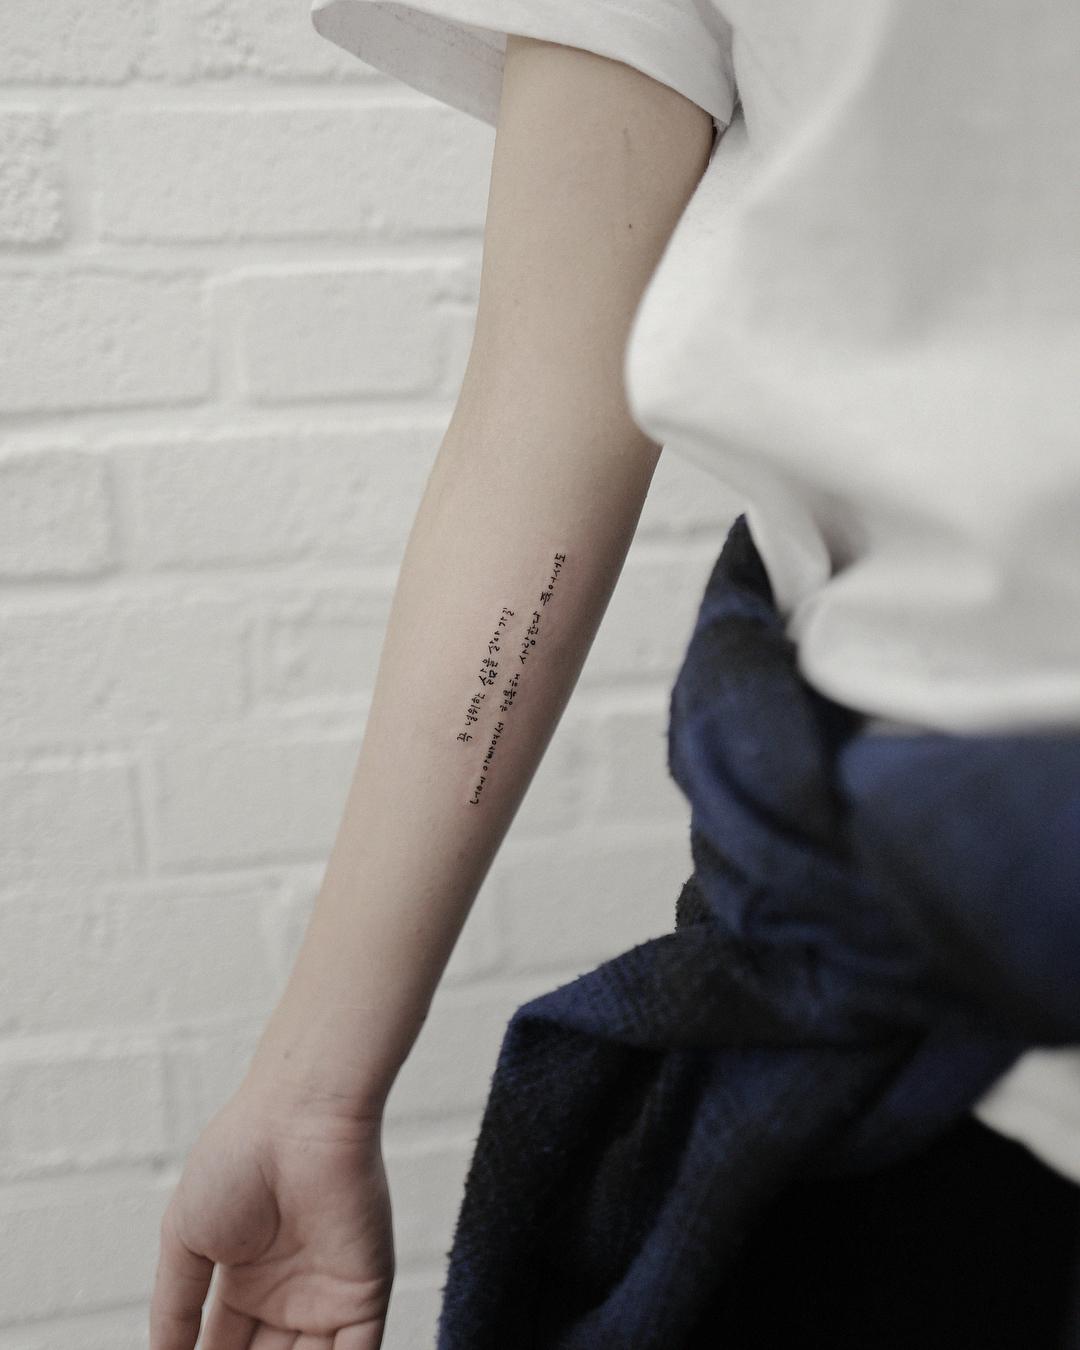 Her father’s handwriting by @tattoo_a_piece